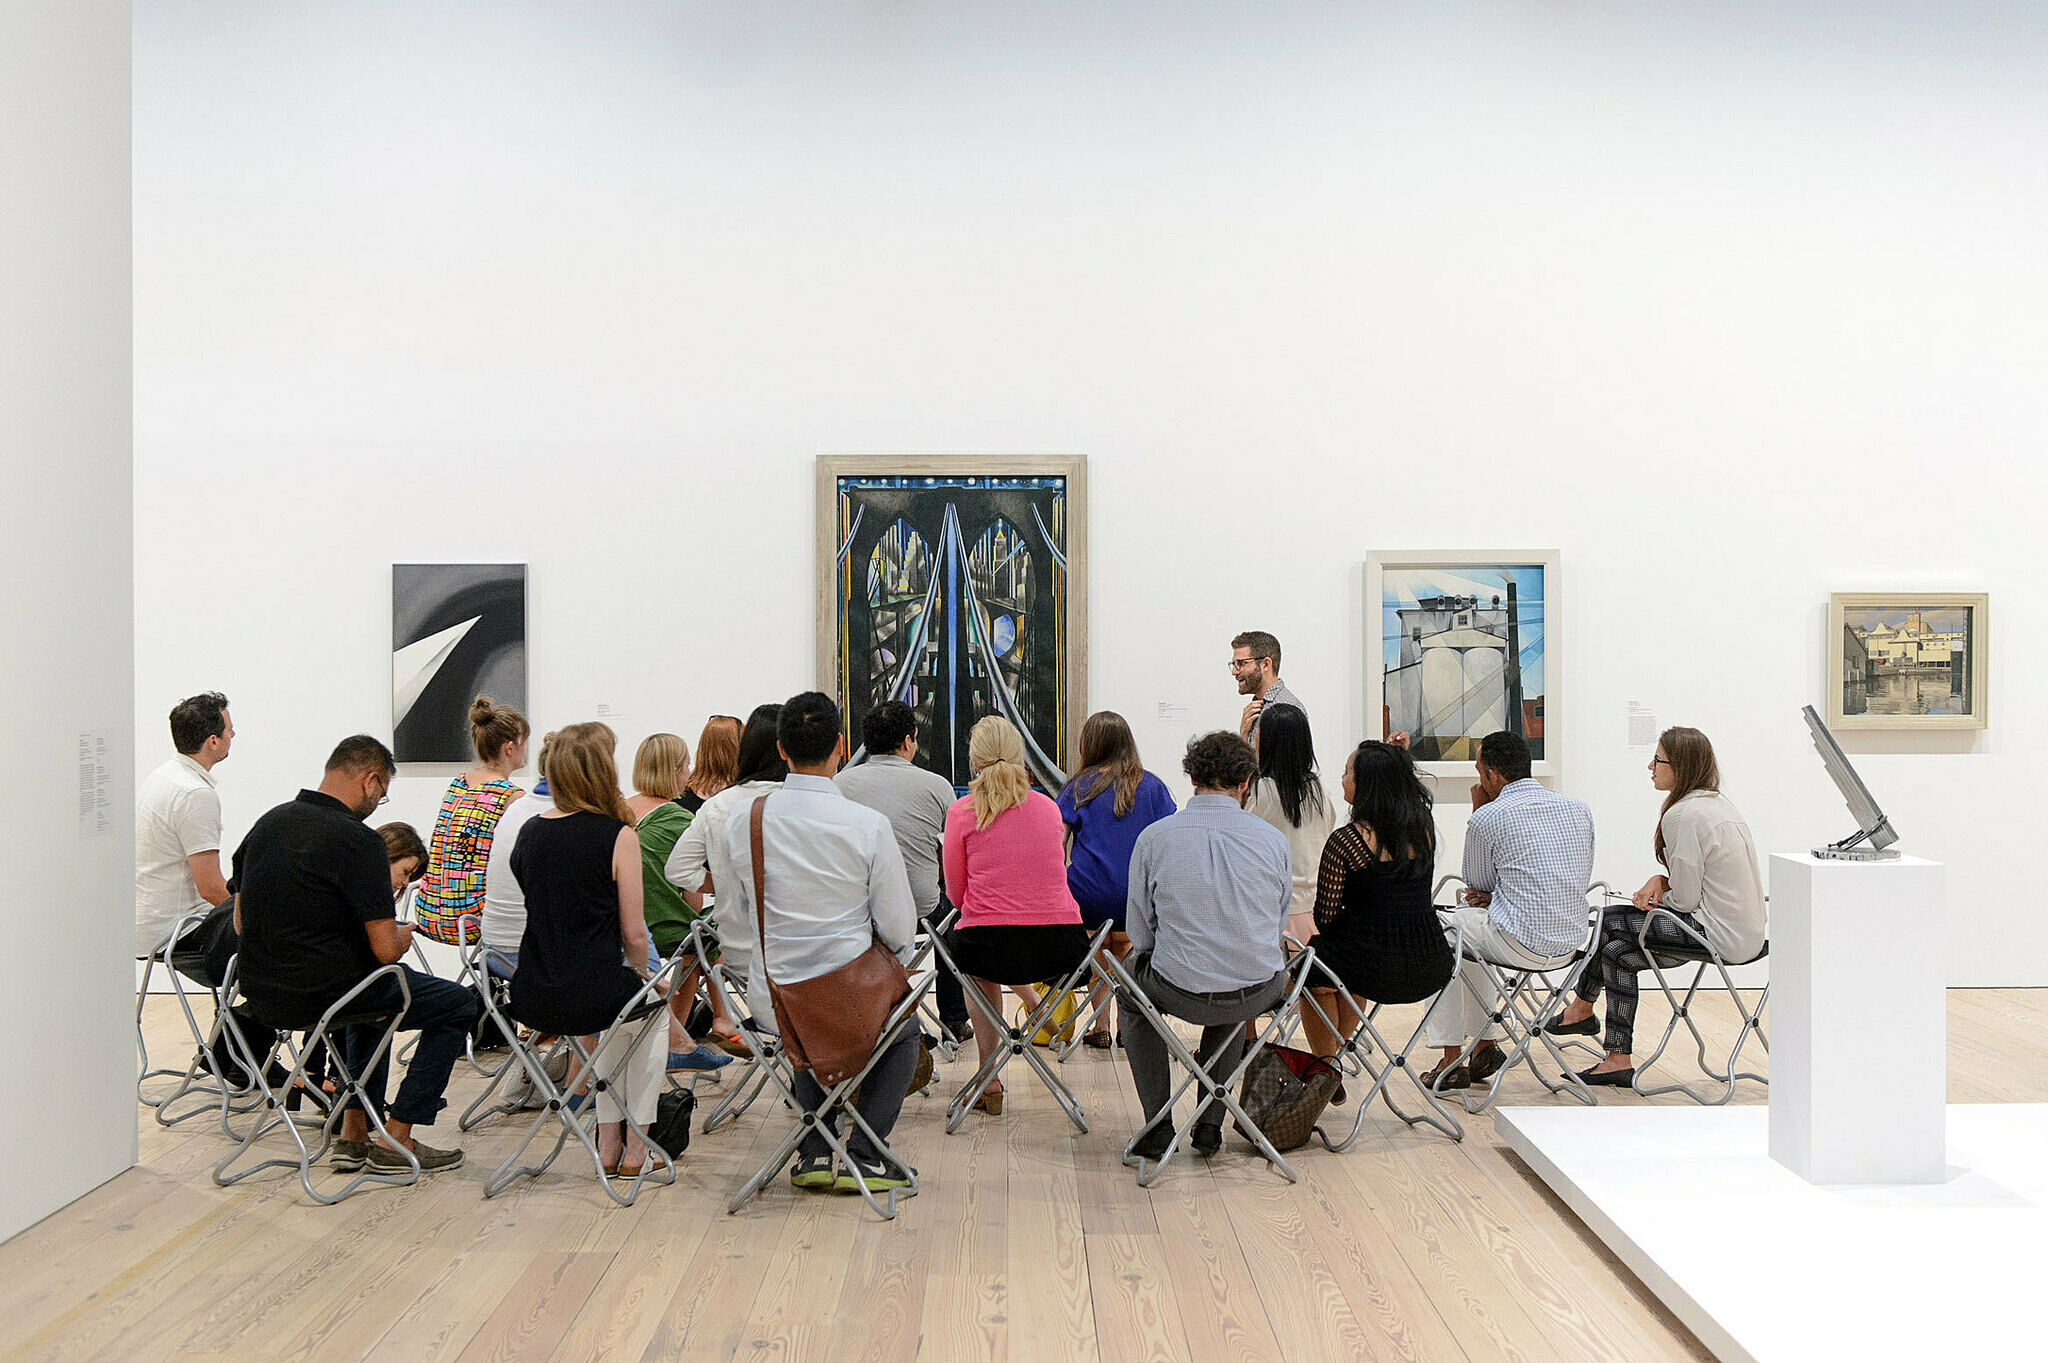 Educator Mark Joshua Epstein leads a tour in the galleries